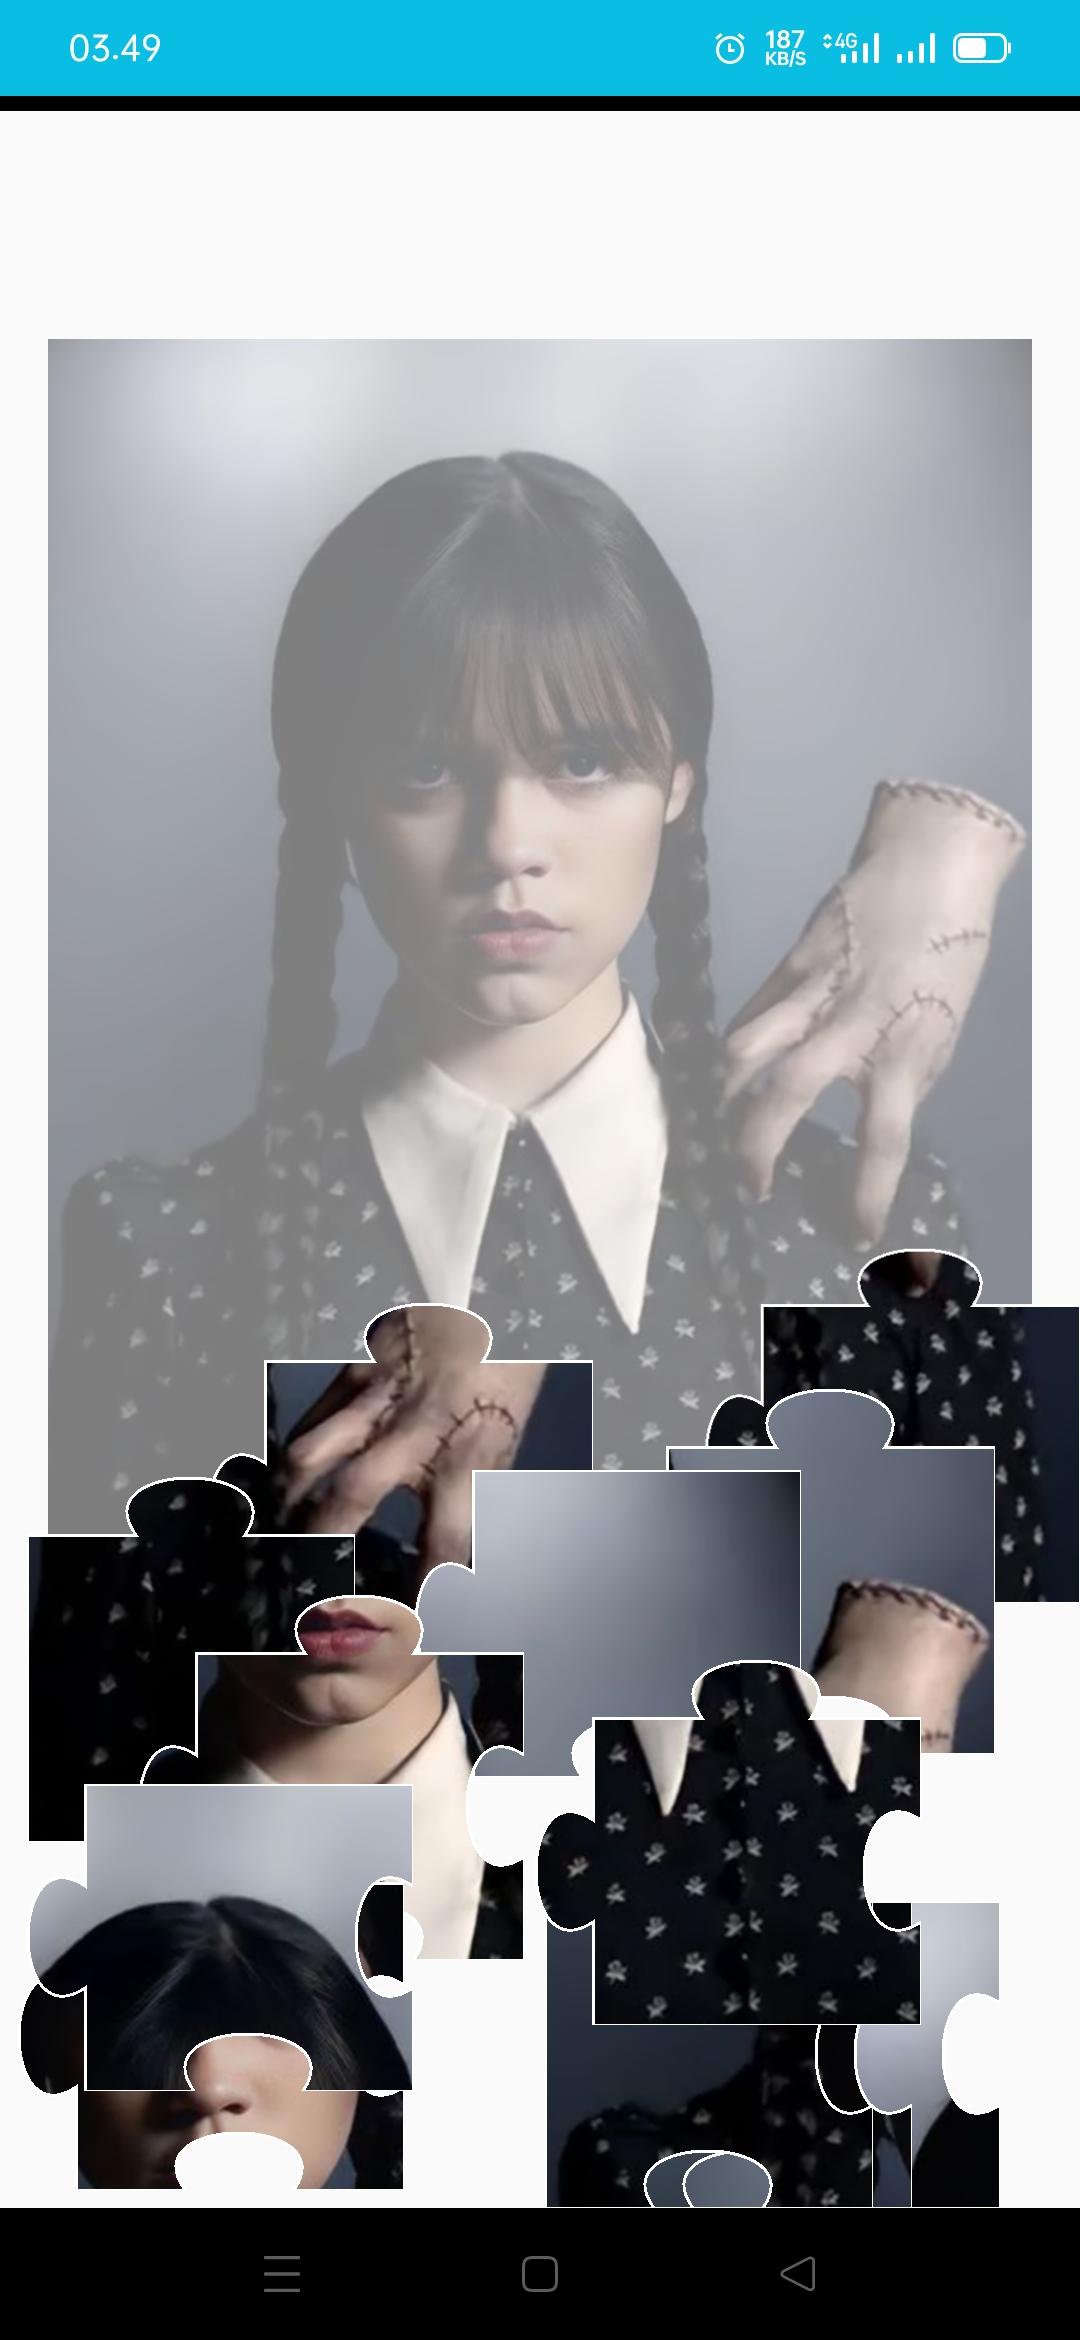 About: Wednesday Addams Game Puzzle (Google Play version)